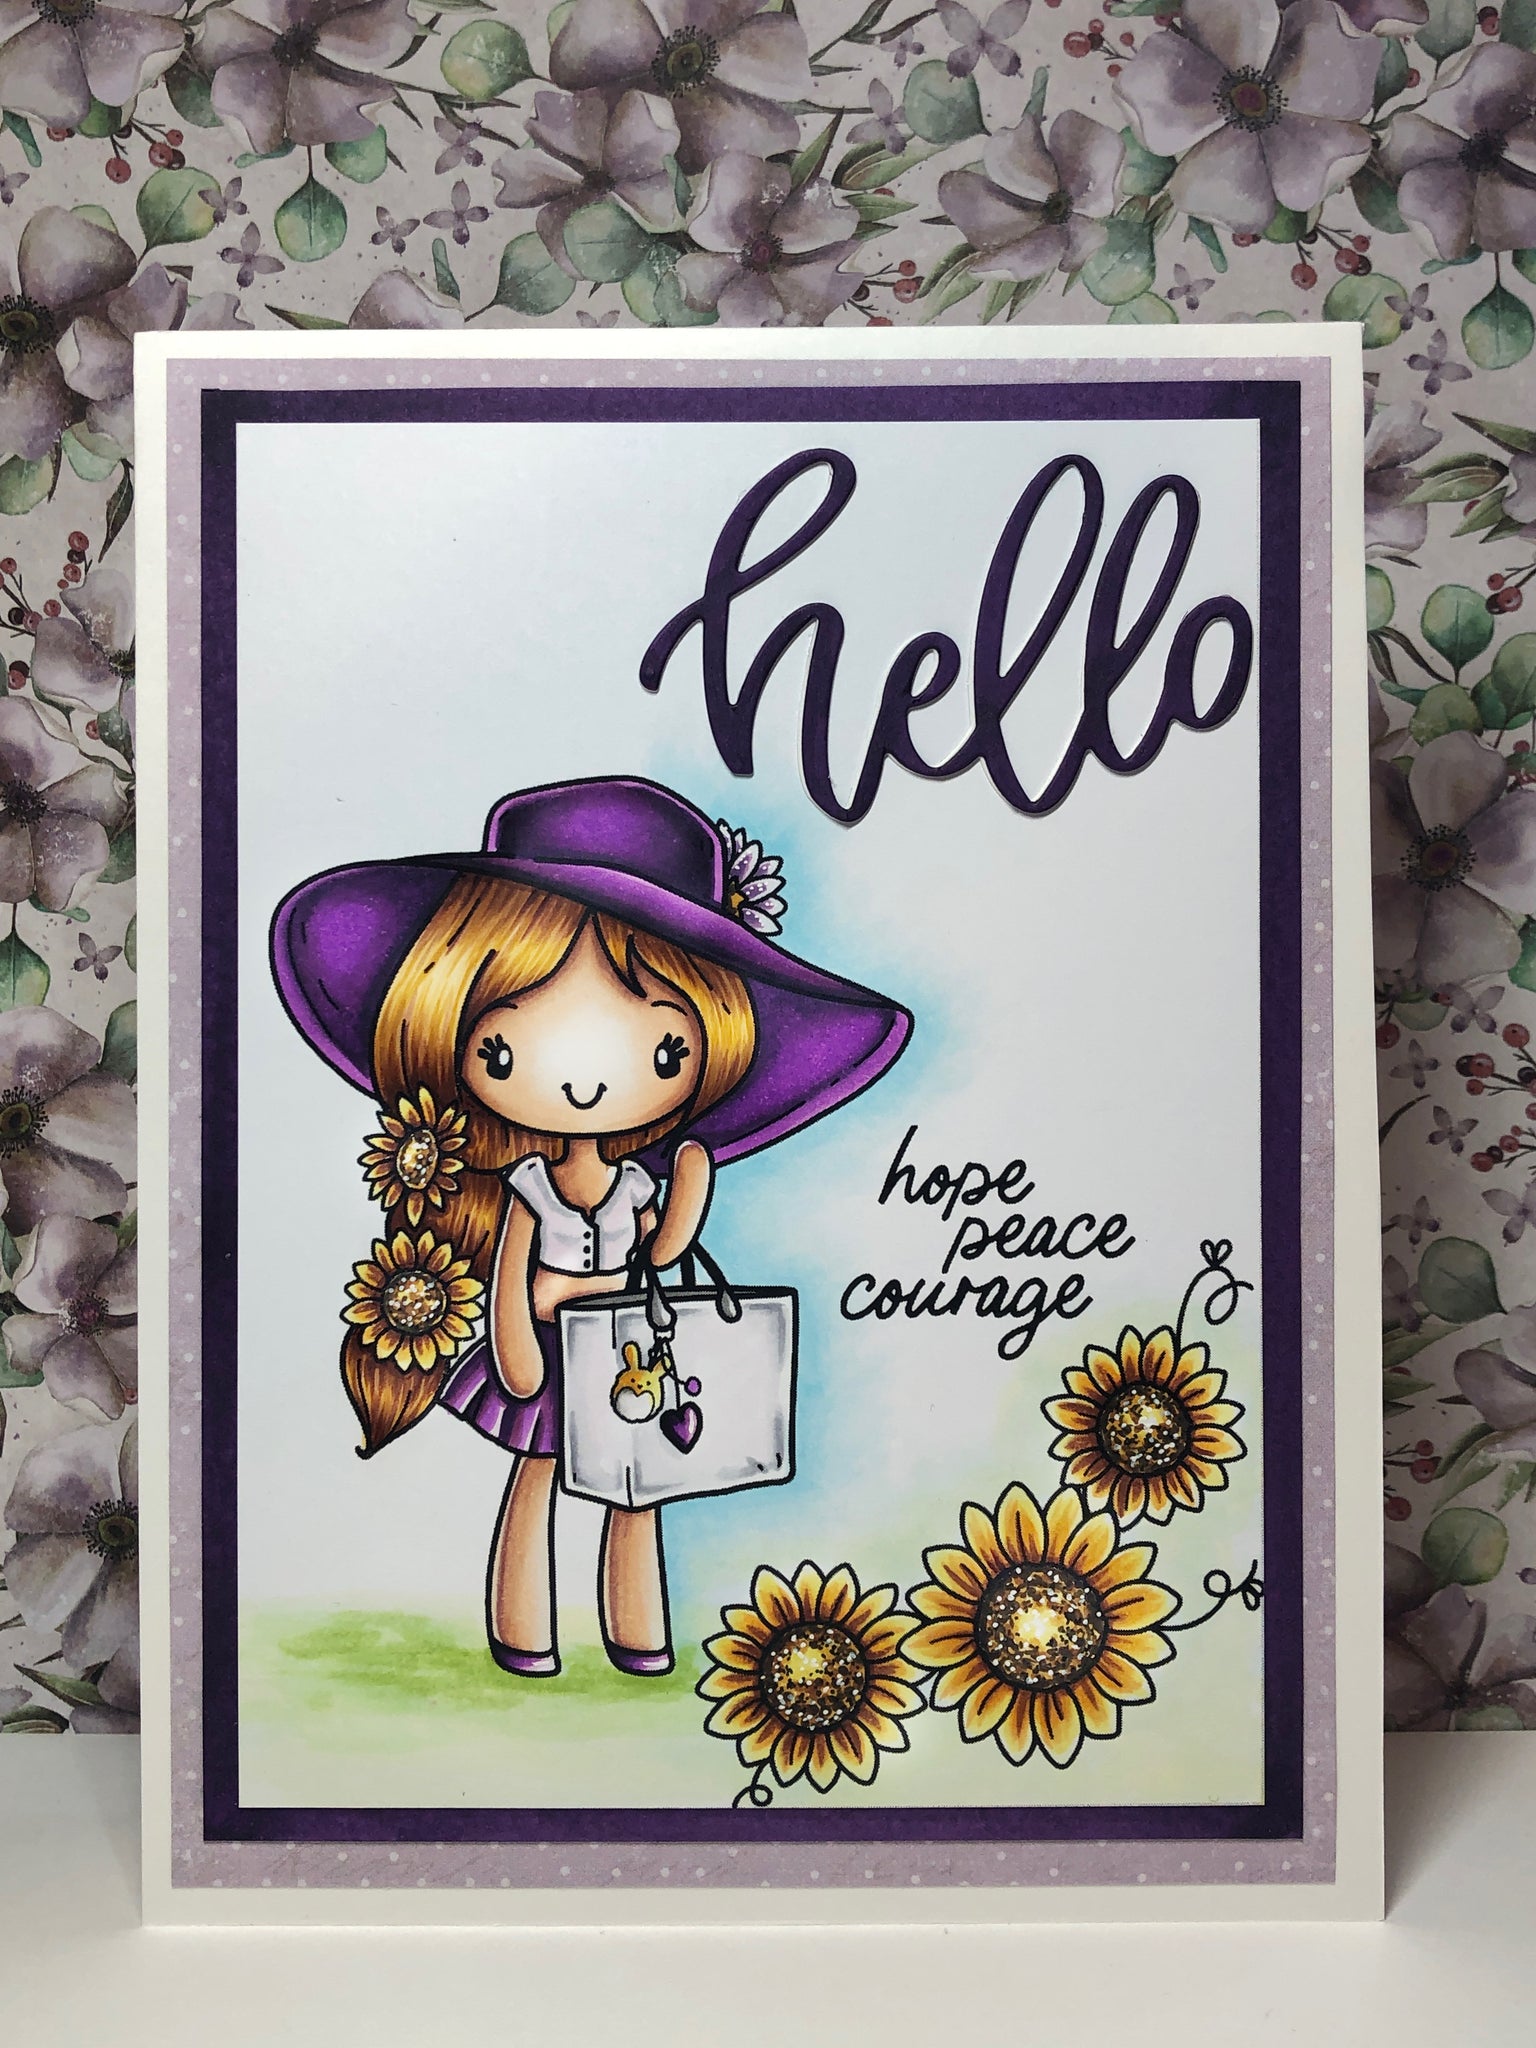 Welcome to our wonderful Guest Designer Christine Copic!